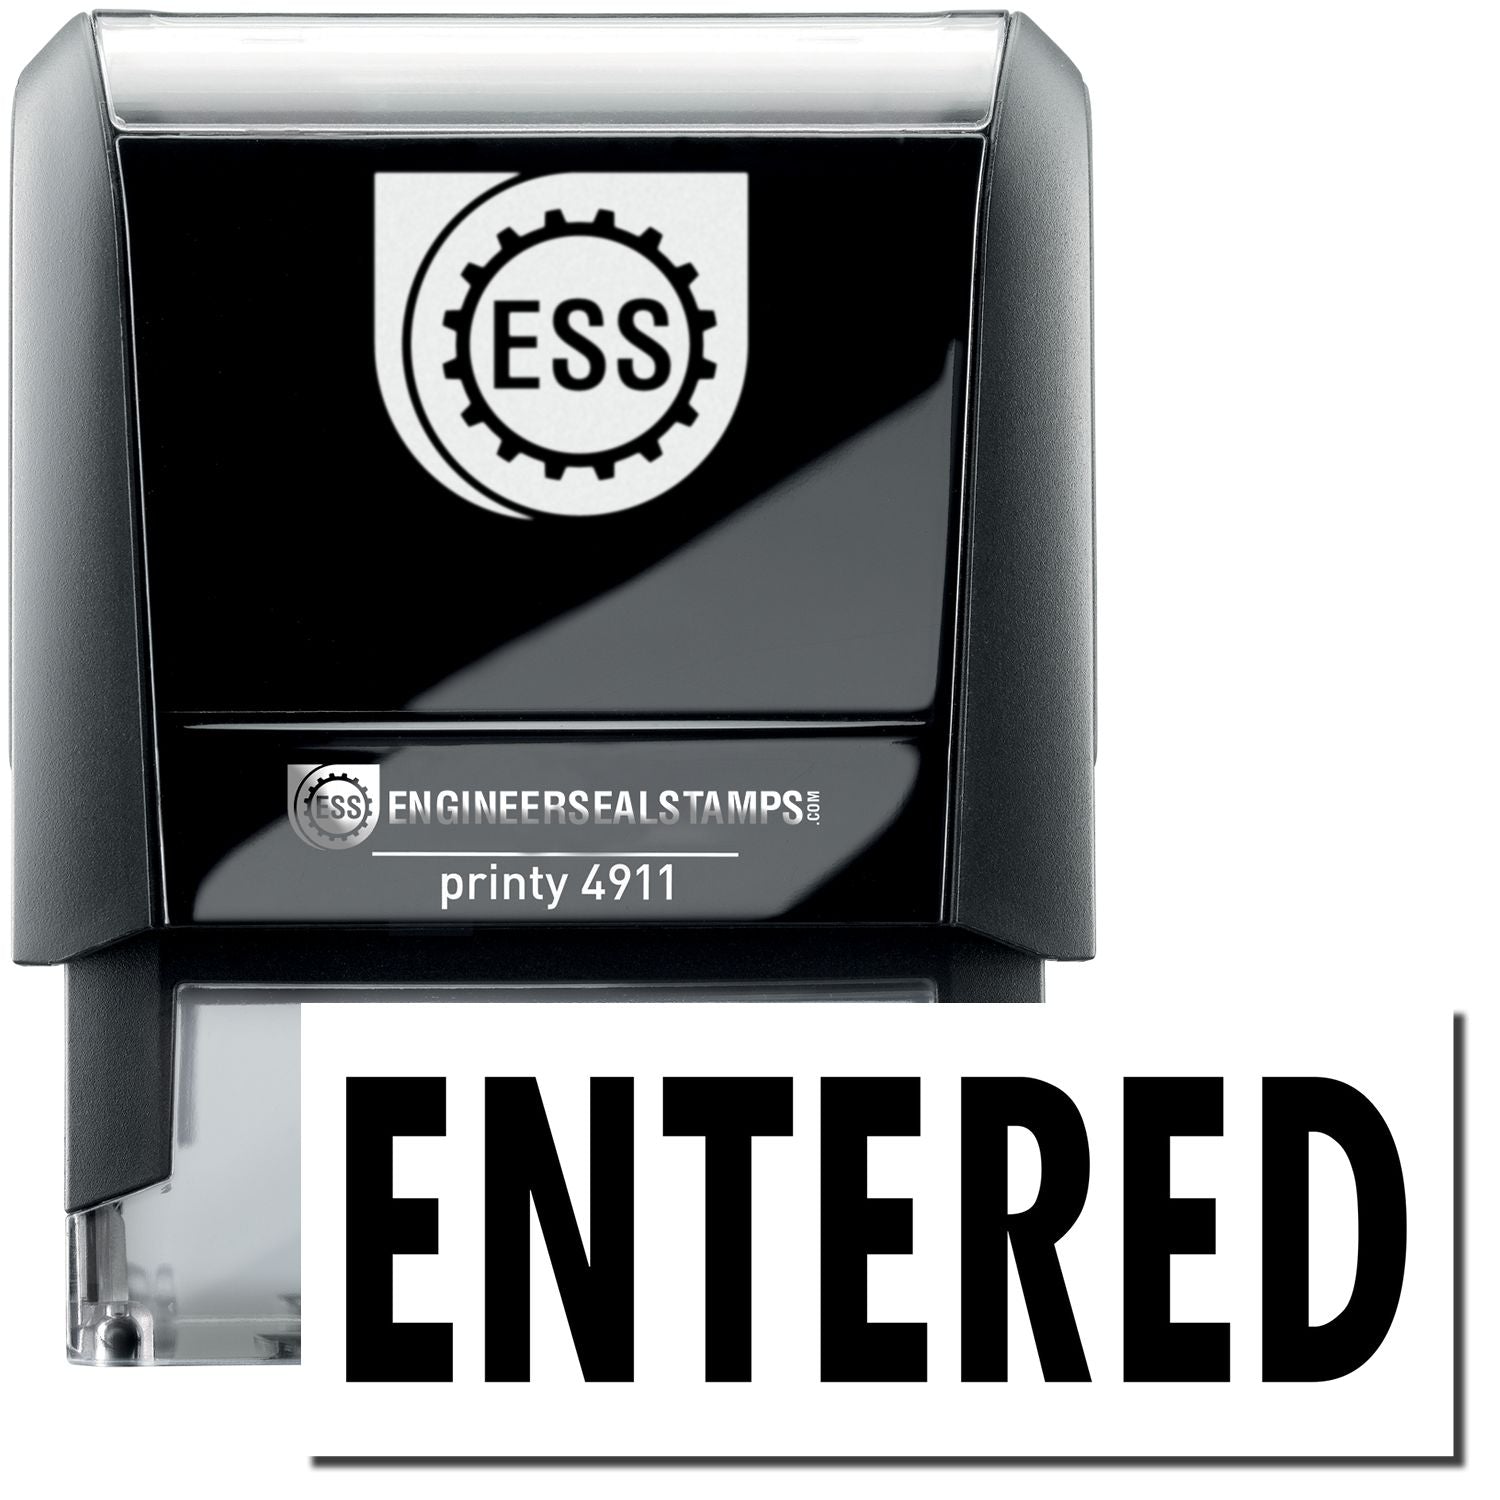 A self-inking stamp with a stamped image showing how the text "ENTERED" is displayed after stamping.